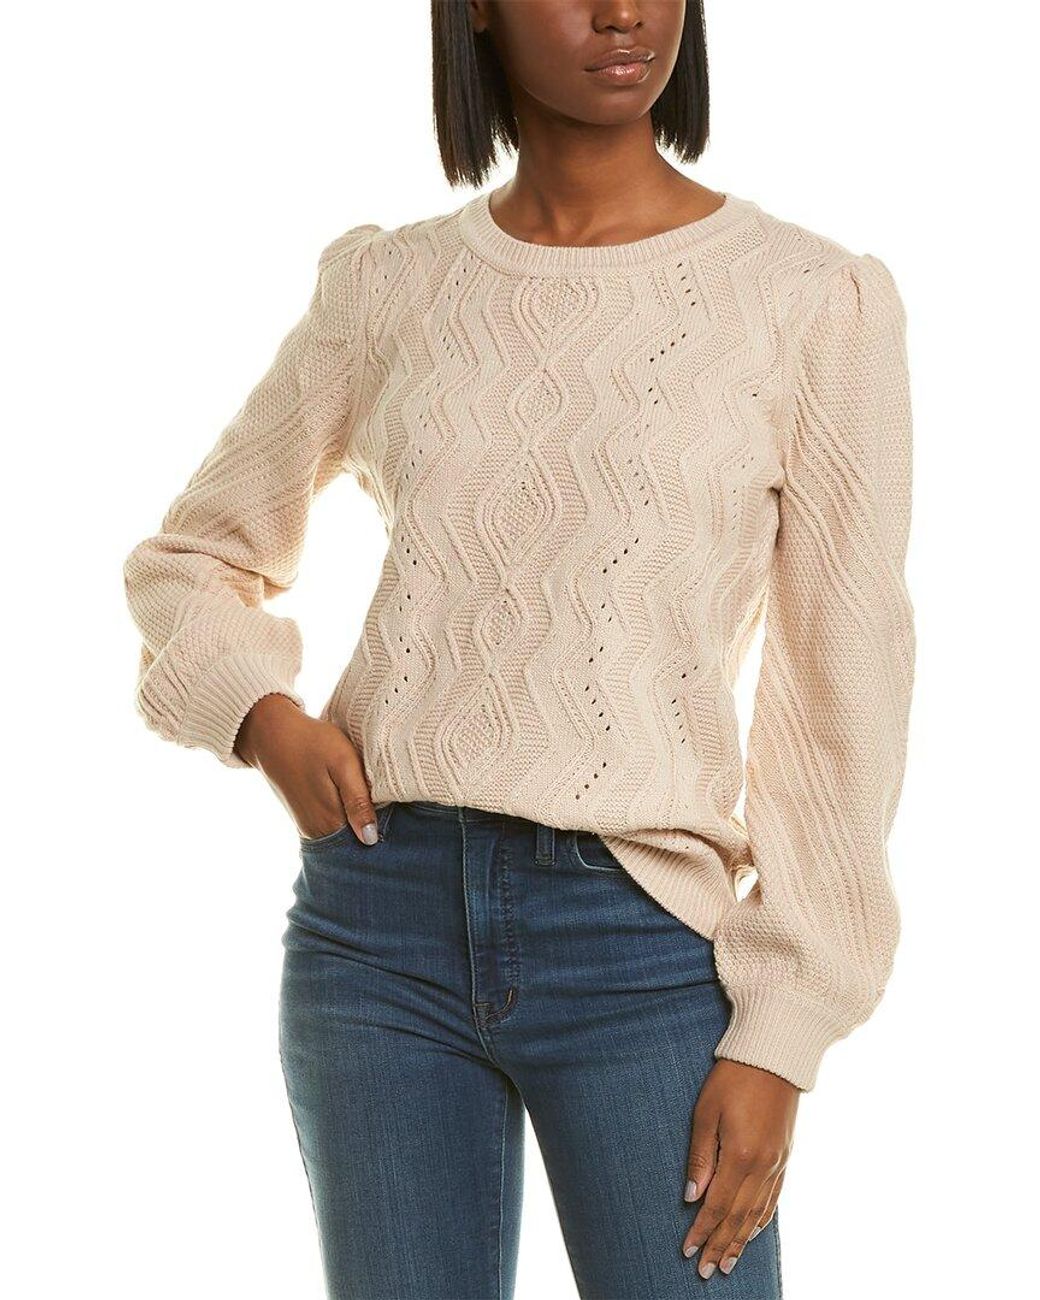 Karl Lagerfeld Synthetic Puff Shoulder Sweater in Beige (Natural) - Lyst